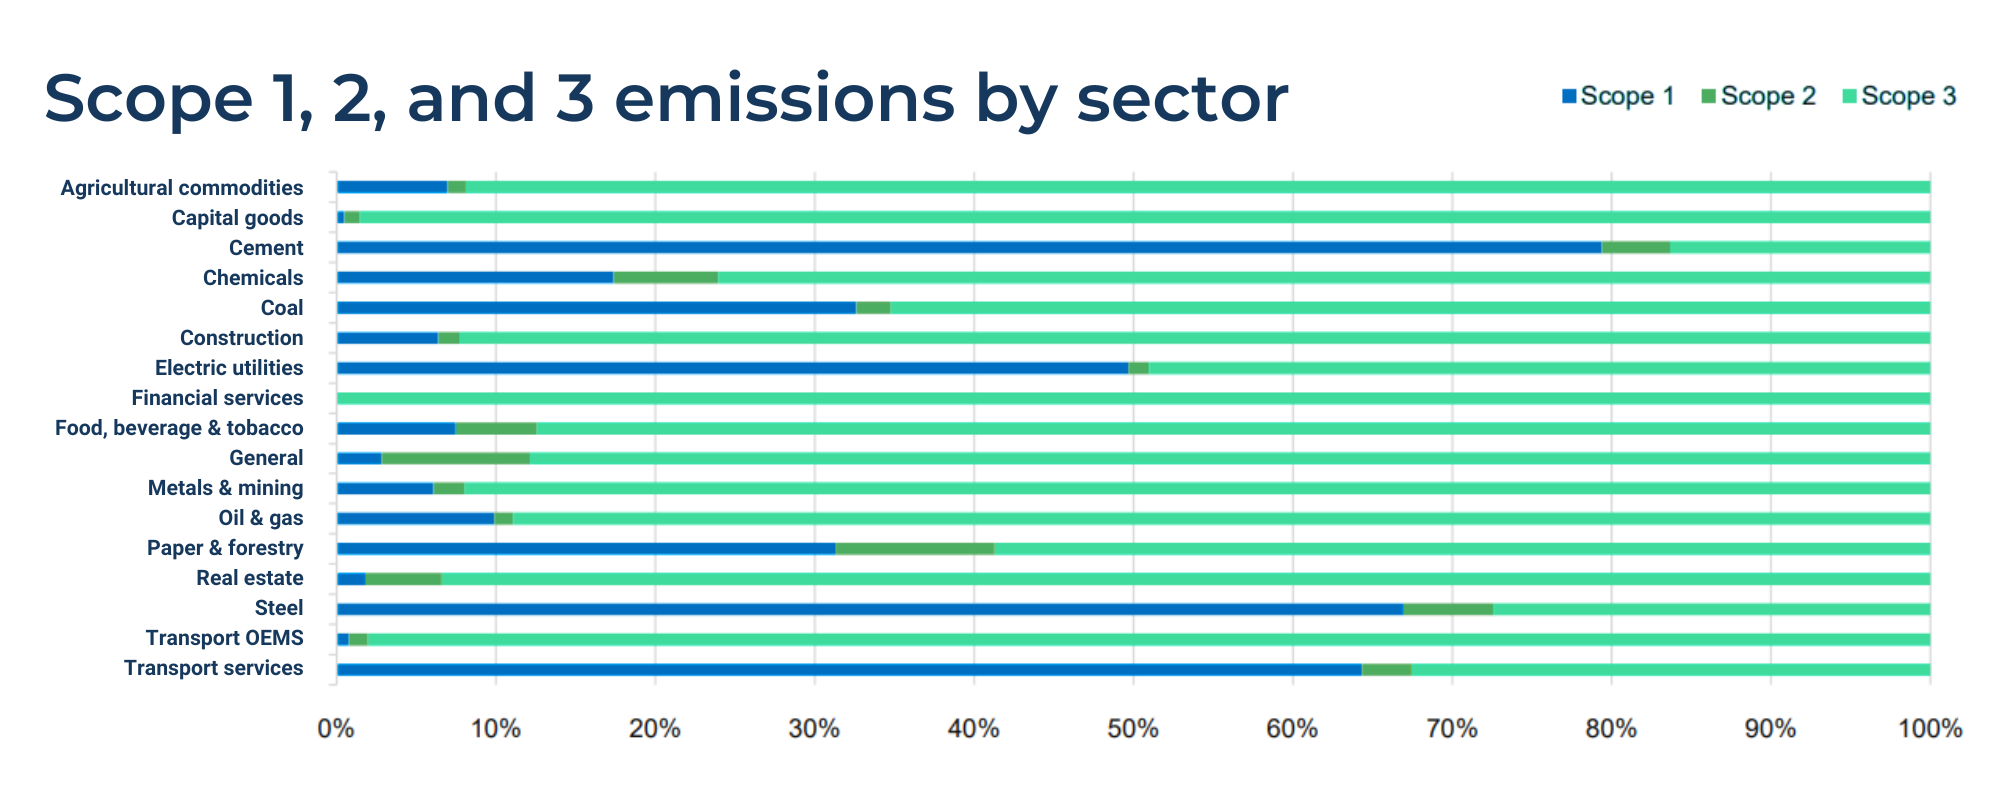 Scope 1, 2, and 3 emissions by sector